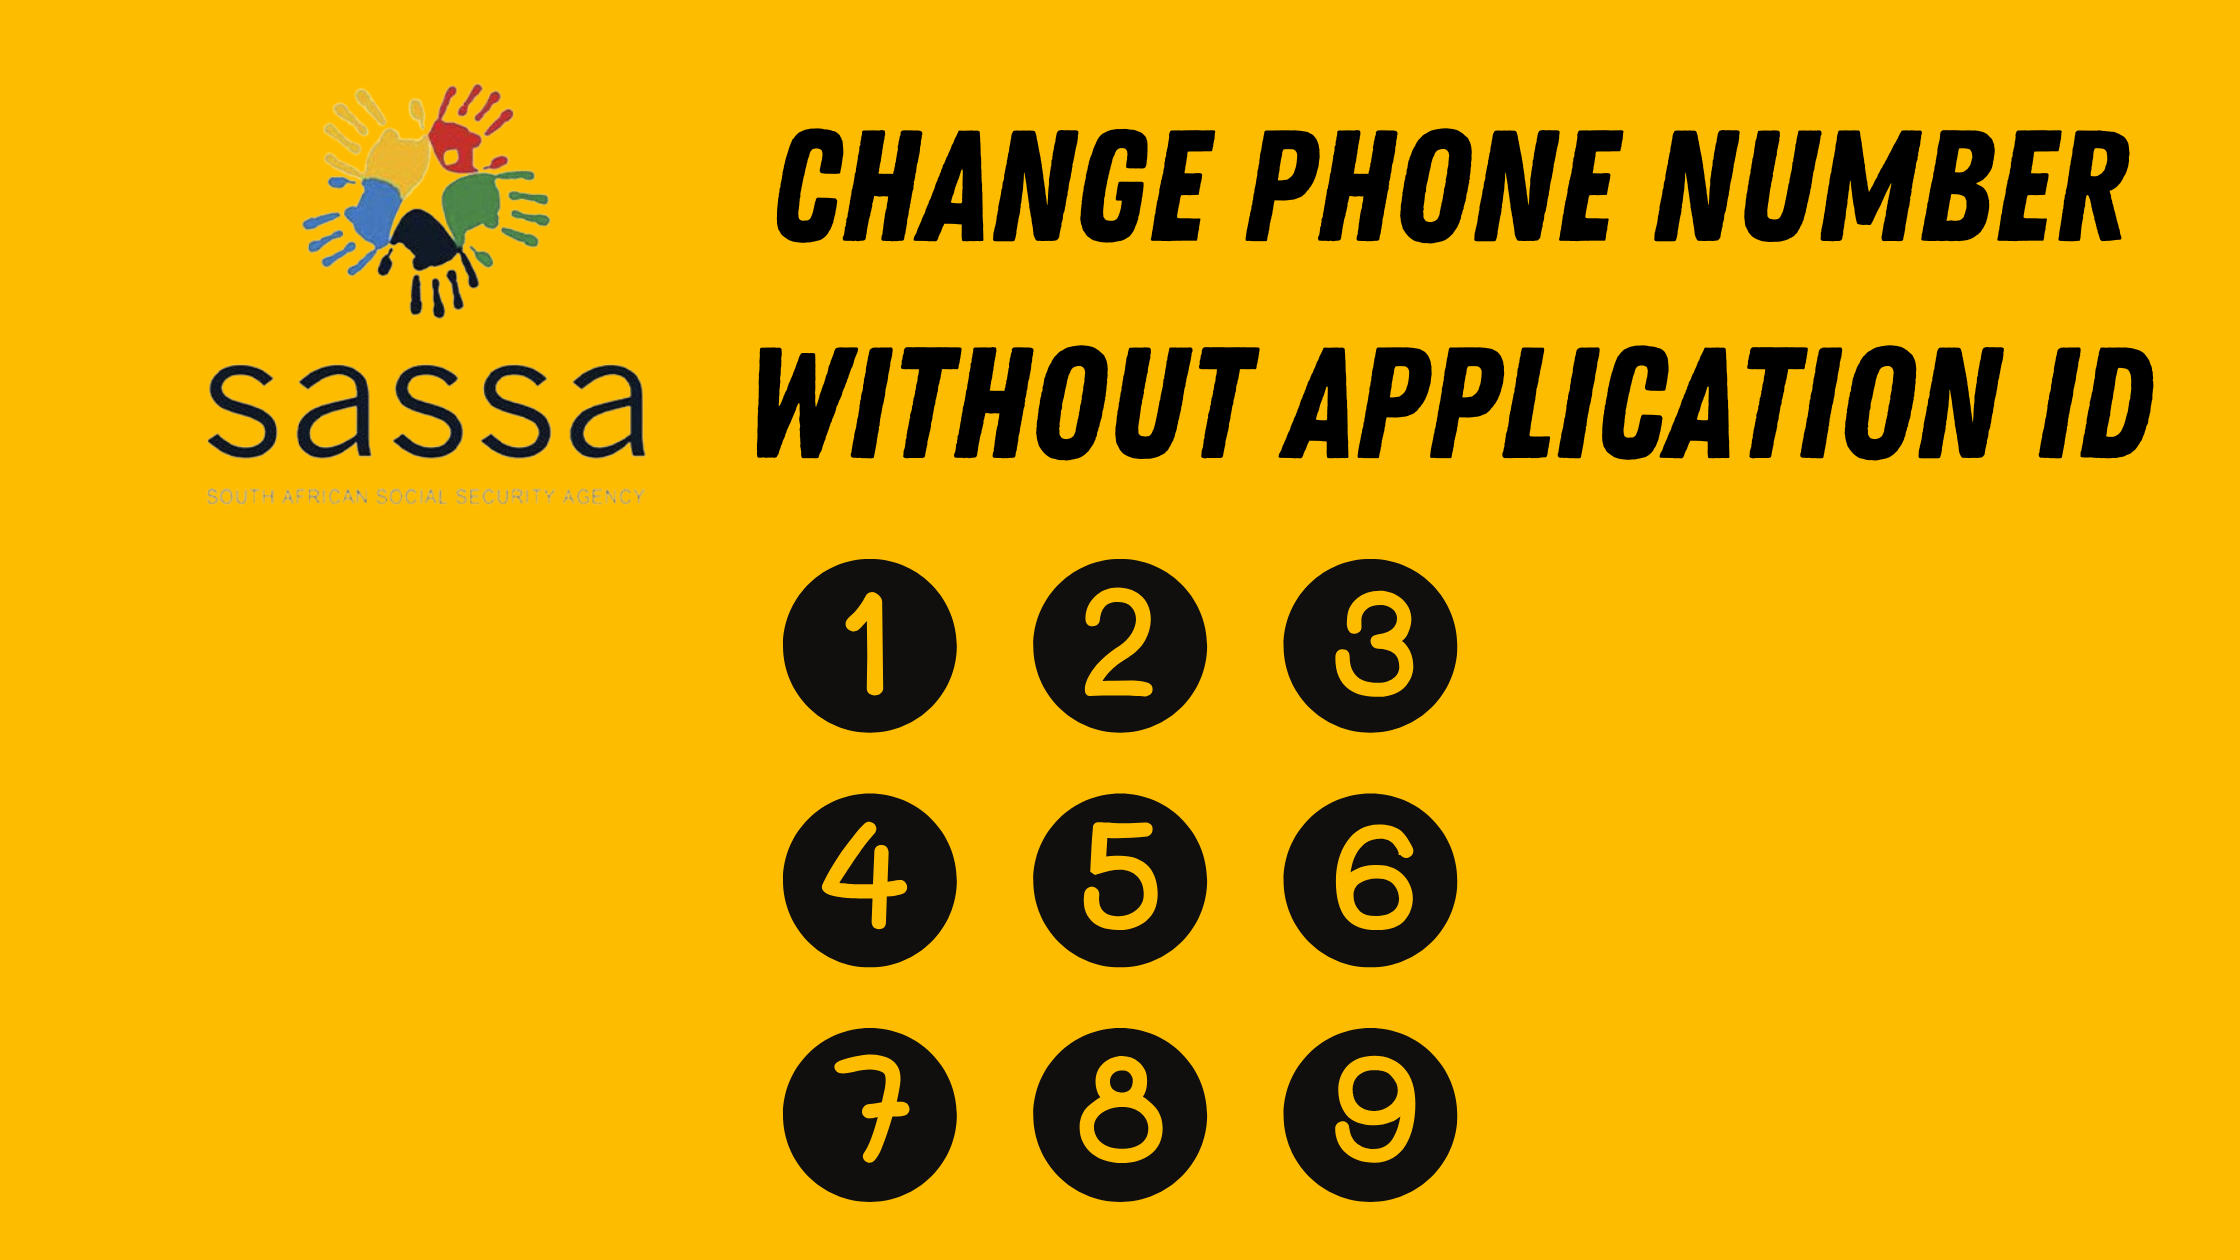 Sassa change phone number without application ID